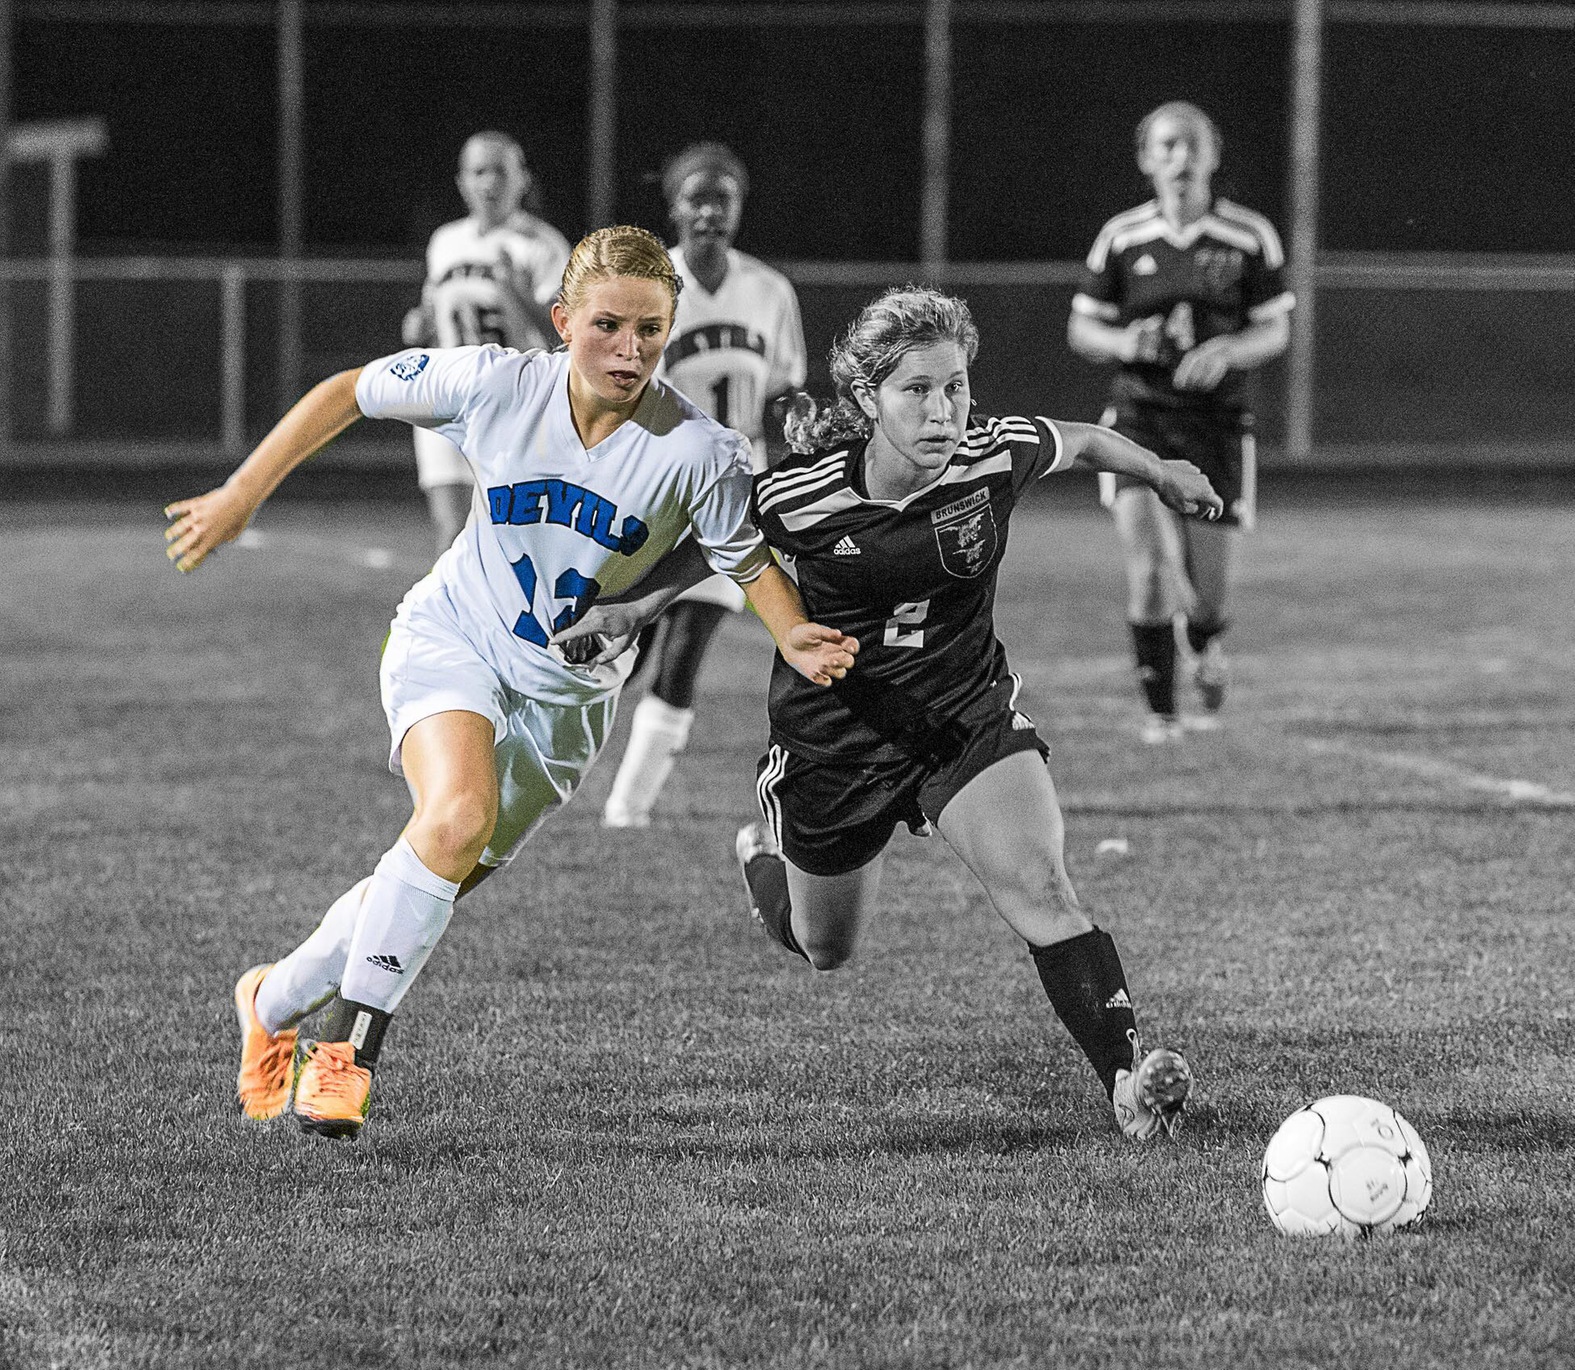 Lewiston's Gagnon latest addition to Women's Soccer recruiting class